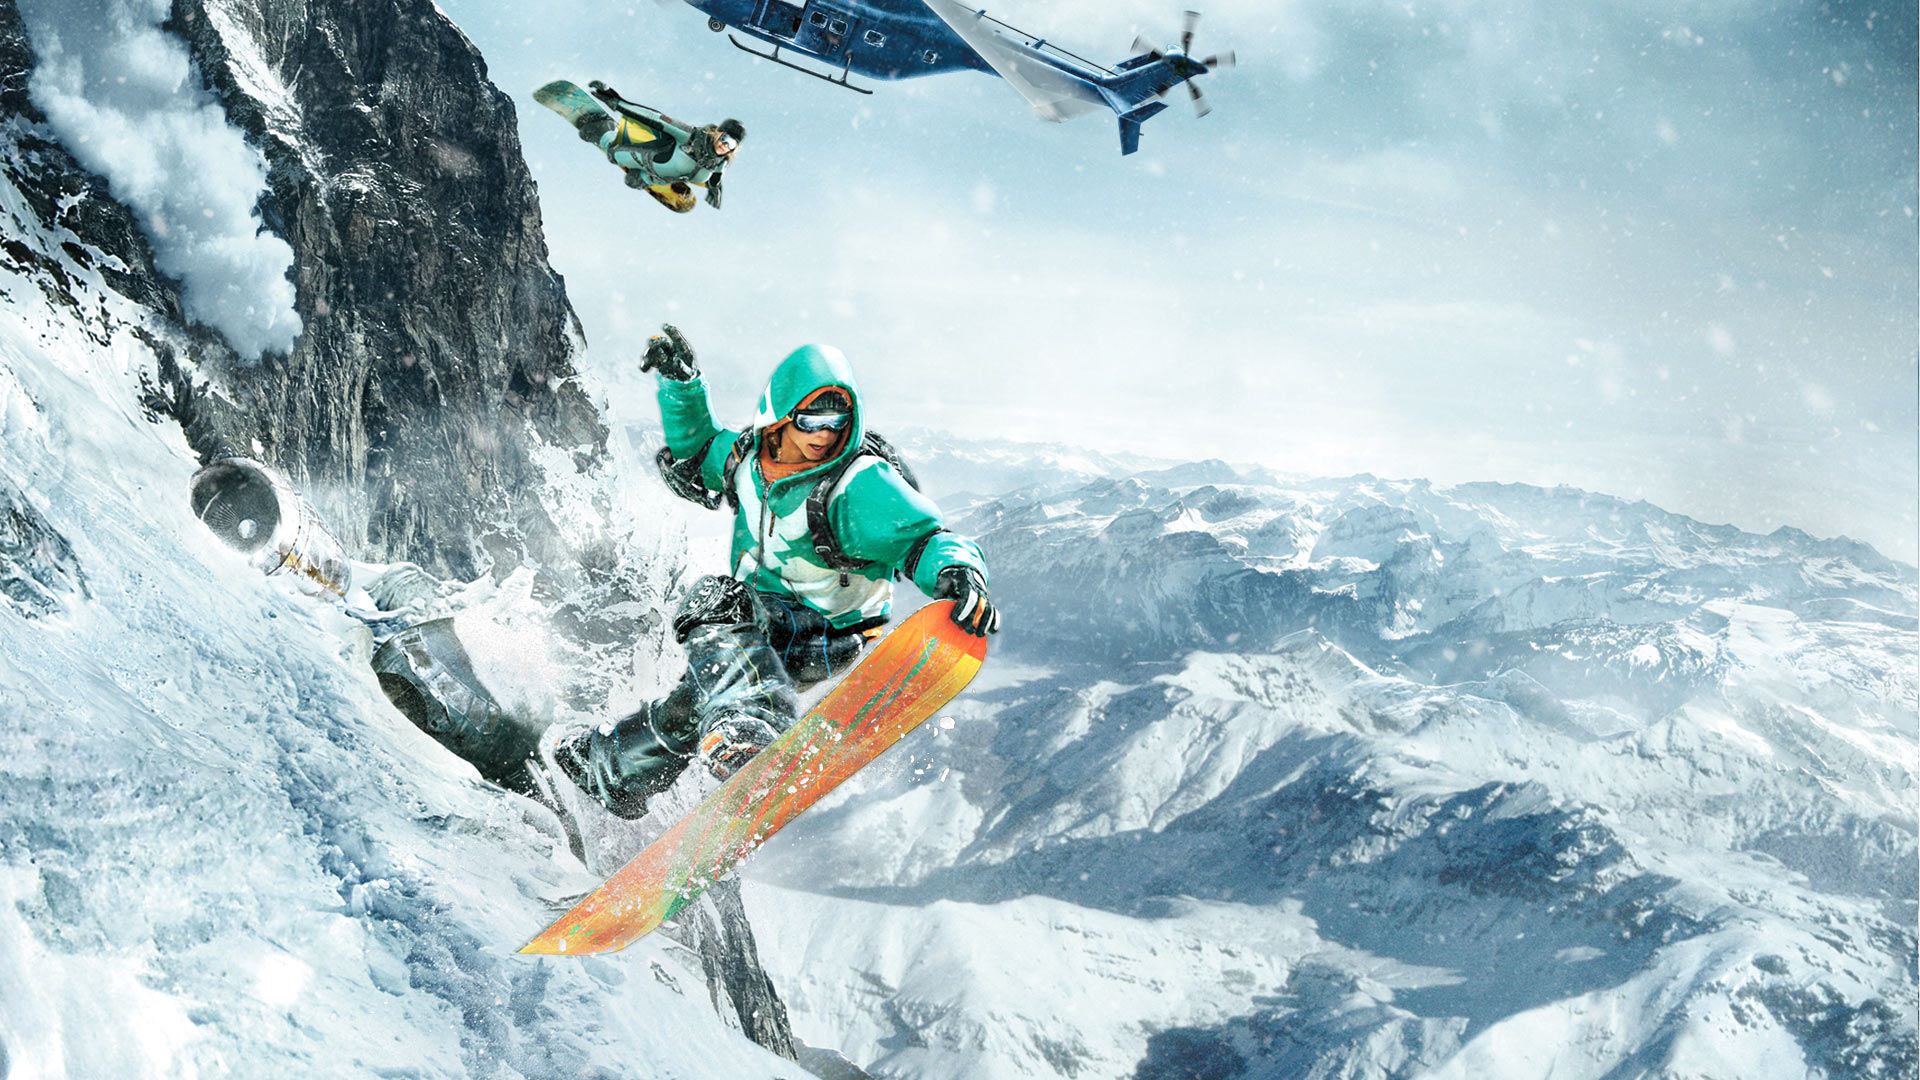 Ssx 2012 pc download full